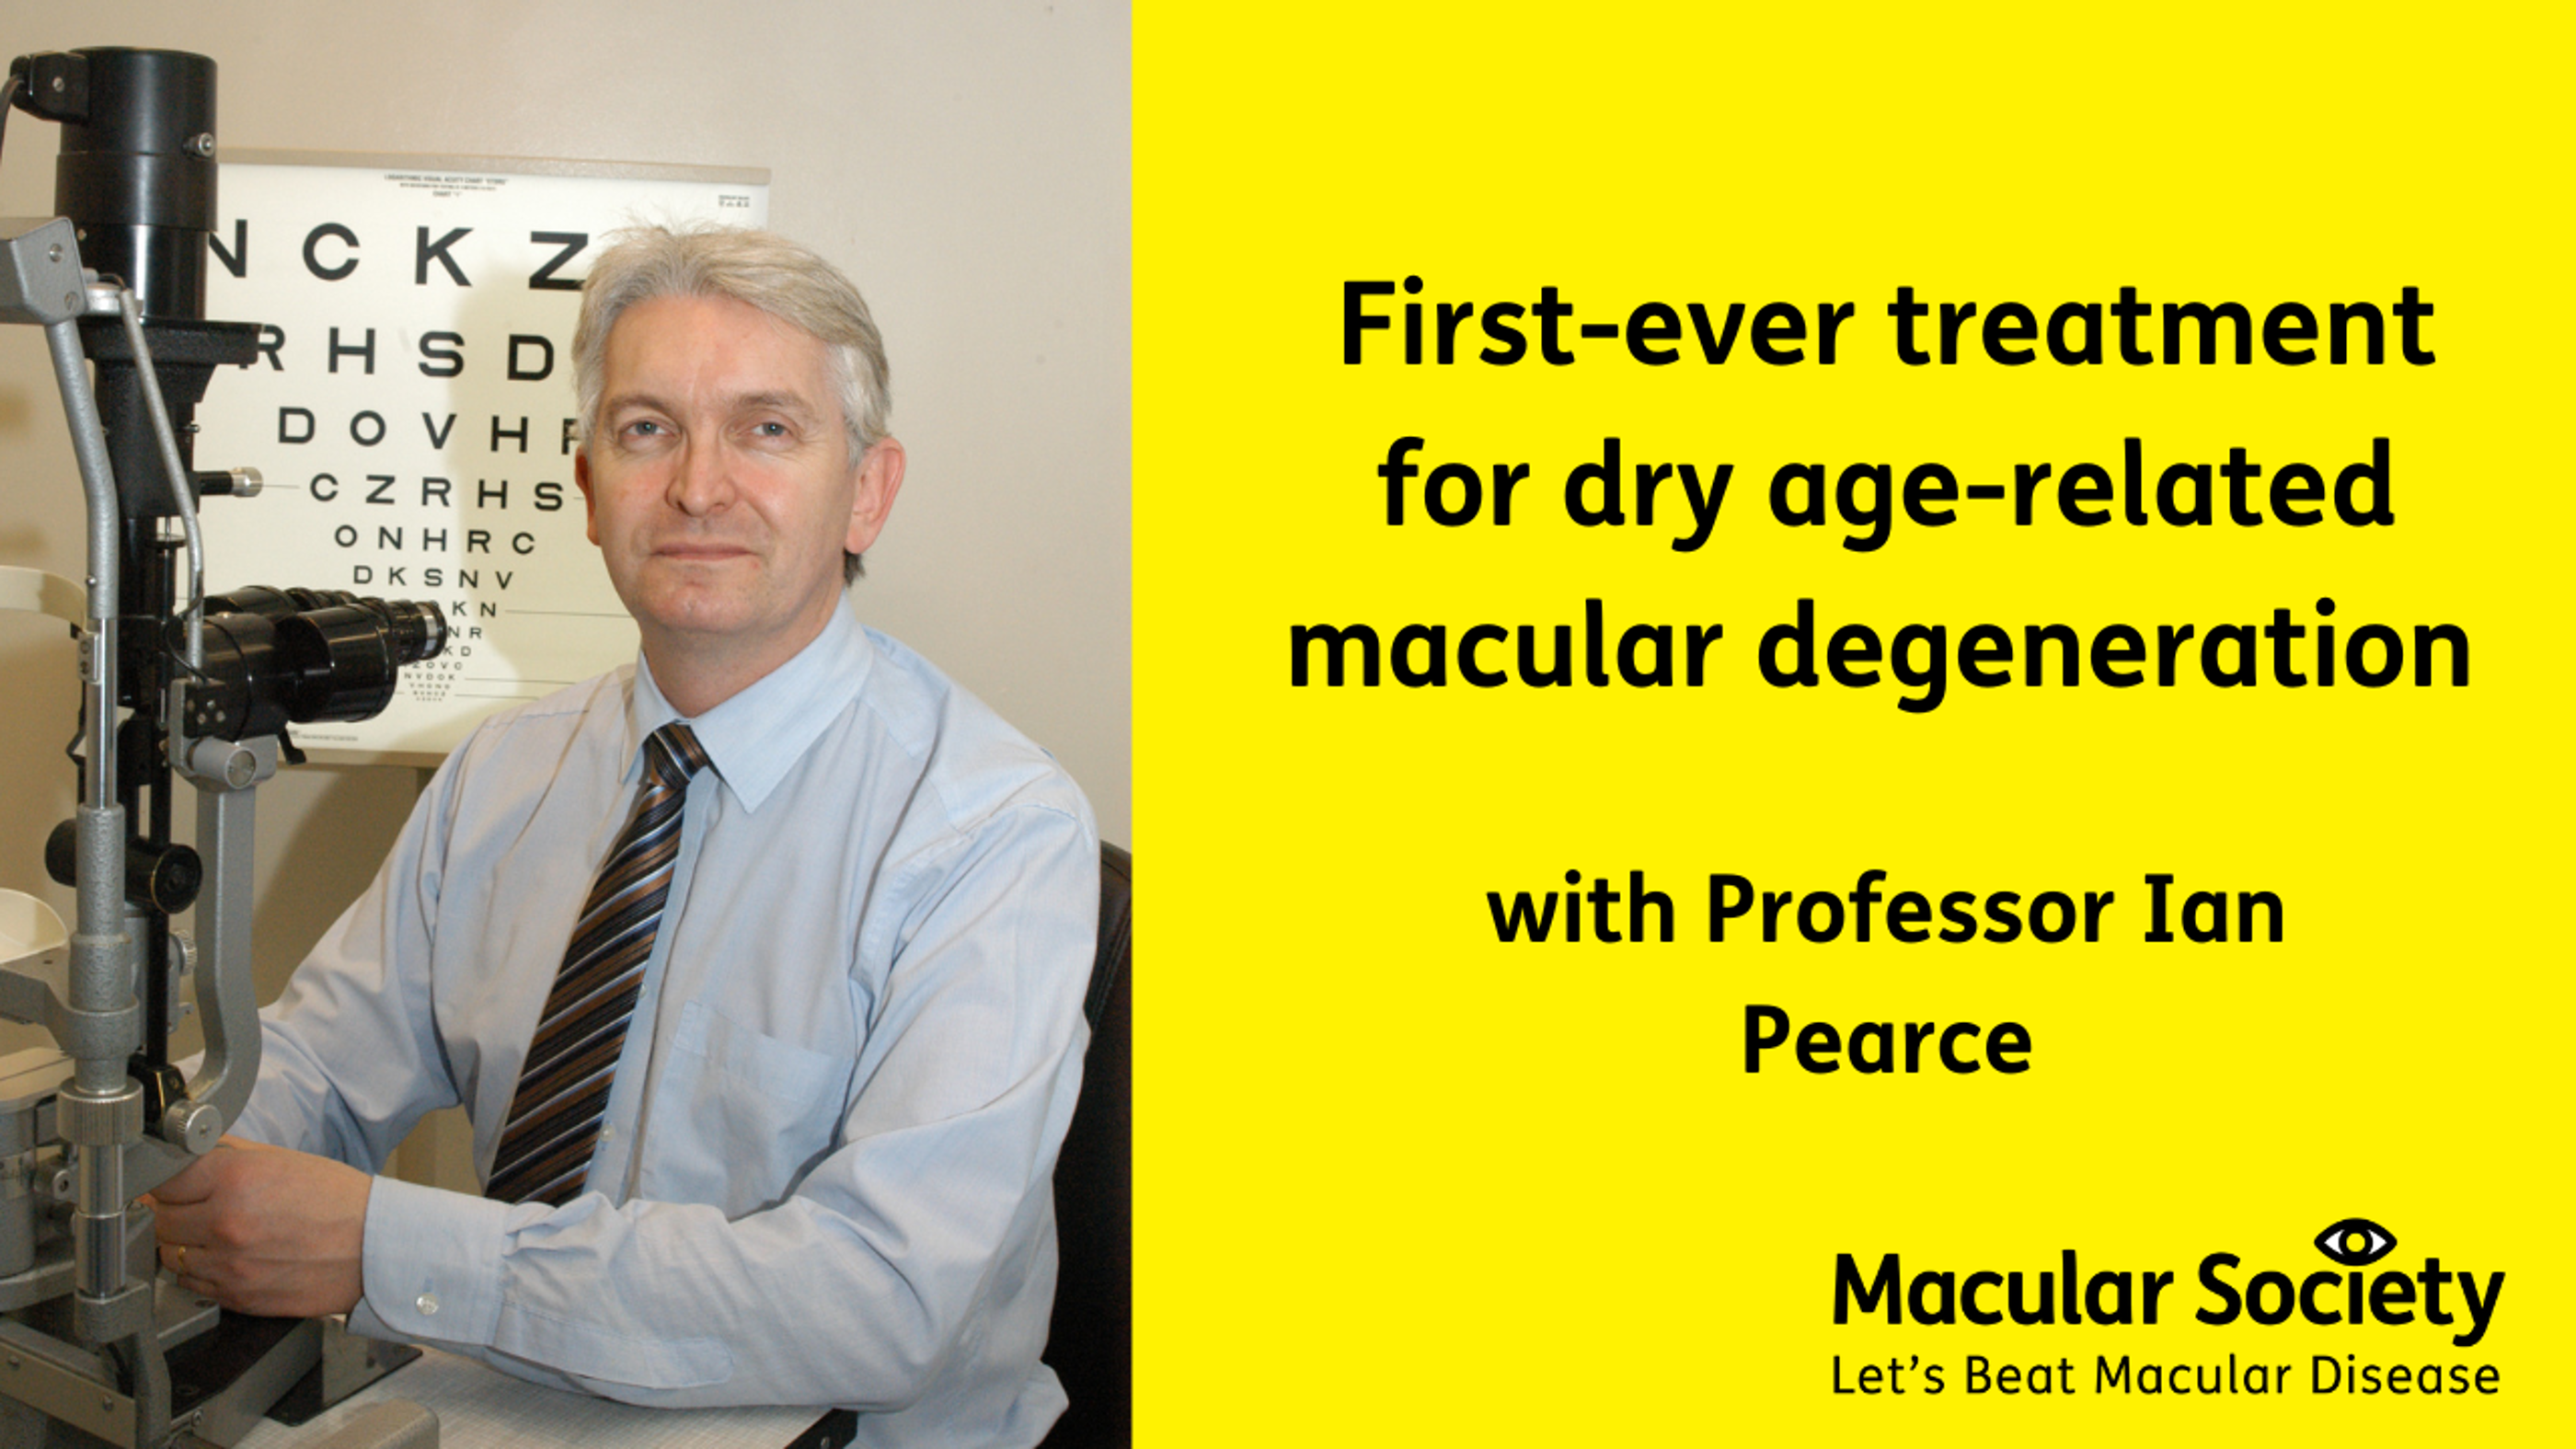 First ever treatment for dry age-related macular degeneration with professor Ian Pearce